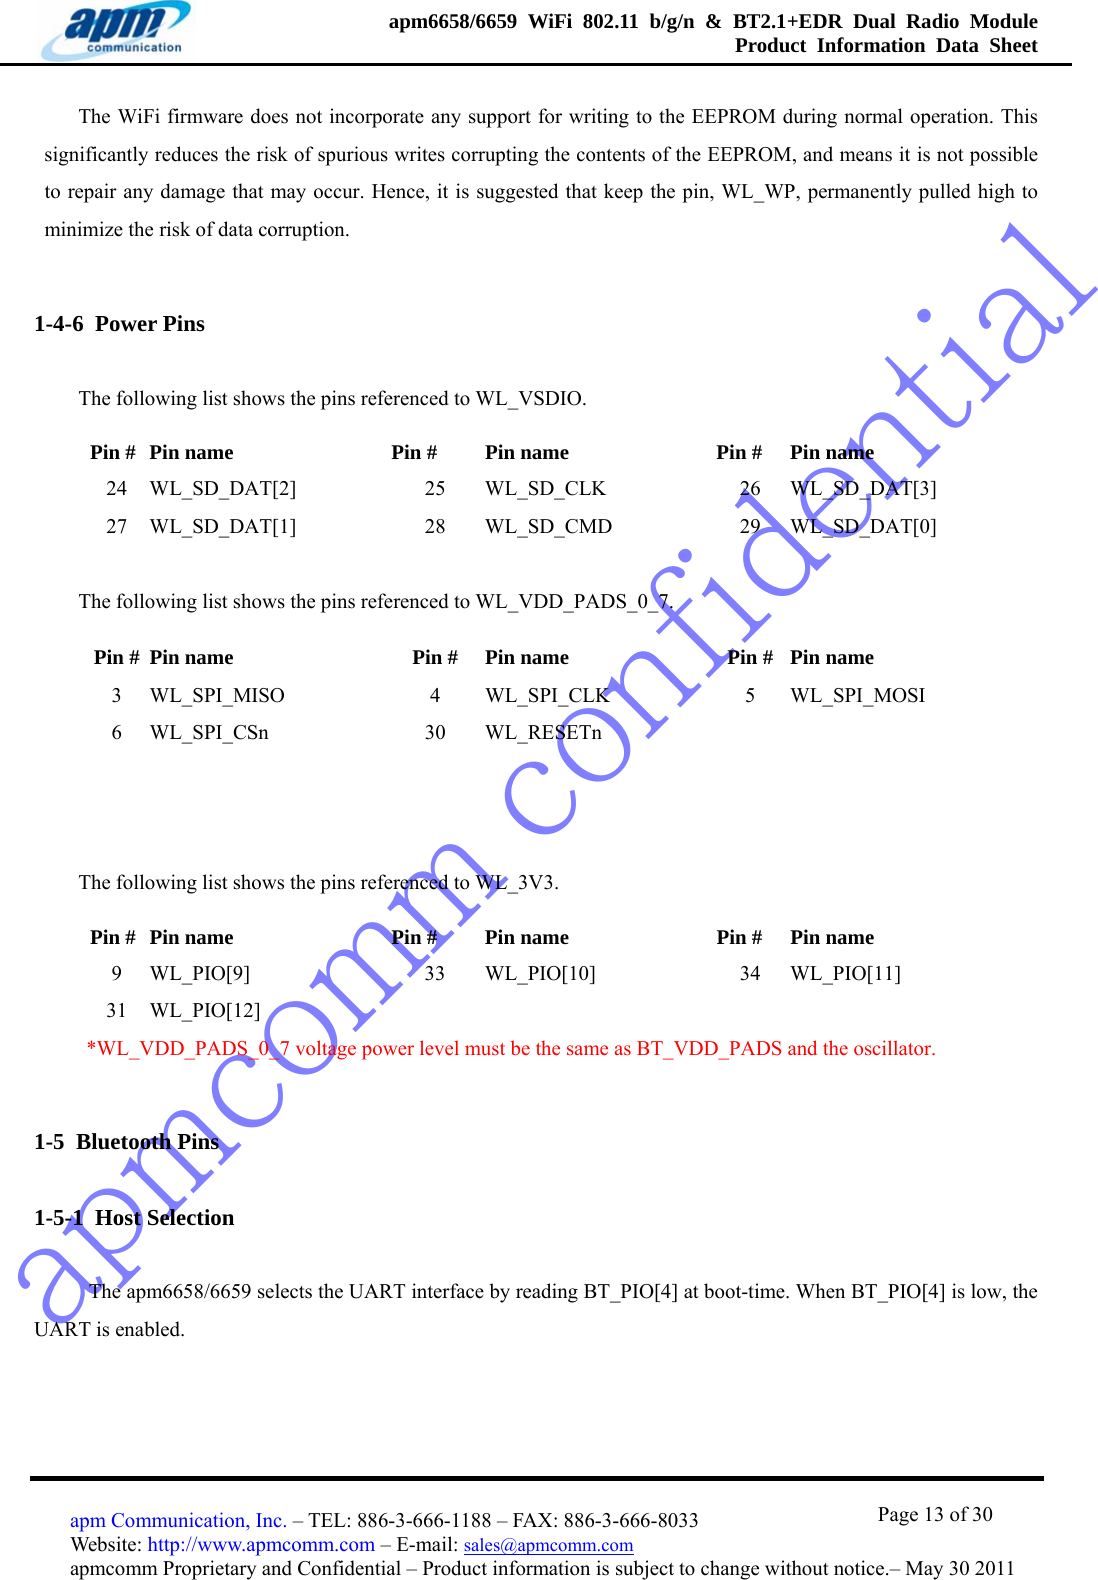 apmcomm confidentialapm6658/6659 WiFi 802.11 b/g/n &amp; BT2.1+EDR Dual Radio Module  Product Information Data Sheet                                       Page 13 of 30 apm Communication, Inc. – TEL: 886-3-666-1188 – FAX: 886-3-666-8033 Website: http://www.apmcomm.com – E-mail: sales@apmcomm.com  apmcomm Proprietary and Confidential – Product information is subject to change without notice.– May 30 2011 The WiFi firmware does not incorporate any support for writing to the EEPROM during normal operation. This significantly reduces the risk of spurious writes corrupting the contents of the EEPROM, and means it is not possible to repair any damage that may occur. Hence, it is suggested that keep the pin, WL_WP, permanently pulled high to minimize the risk of data corruption.   1-4-6  Power Pins The following list shows the pins referenced to WL_VSDIO. Pin #  Pin name    Pin #  Pin name    Pin #  Pin name 24  WL_SD_DAT[2]    25  WL_SD_CLK   26  WL_SD_DAT[3]  27  WL_SD_DAT[1]   28  WL_SD_CMD   29 WL_SD_DAT[0] The following list shows the pins referenced to WL_VDD_PADS_0_7. Pin #  Pin name    Pin #  Pin name    Pin # Pin name 3 WL_SPI_MISO  4 WL_SPI_CLK  5 WL_SPI_MOSI 6 WL_SPI_CSn   30 WL_RESETn     The following list shows the pins referenced to WL_3V3. Pin #  Pin name    Pin #  Pin name    Pin #  Pin name 9 WL_PIO[9]   33 WL_PIO[10]    34 WL_PIO[11] 31 WL_PIO[12]          *WL_VDD_PADS_0_7 voltage power level must be the same as BT_VDD_PADS and the oscillator. 1-5  Bluetooth Pins 1-5-1  Host Selection   The apm6658/6659 selects the UART interface by reading BT_PIO[4] at boot-time. When BT_PIO[4] is low, the UART is enabled.  